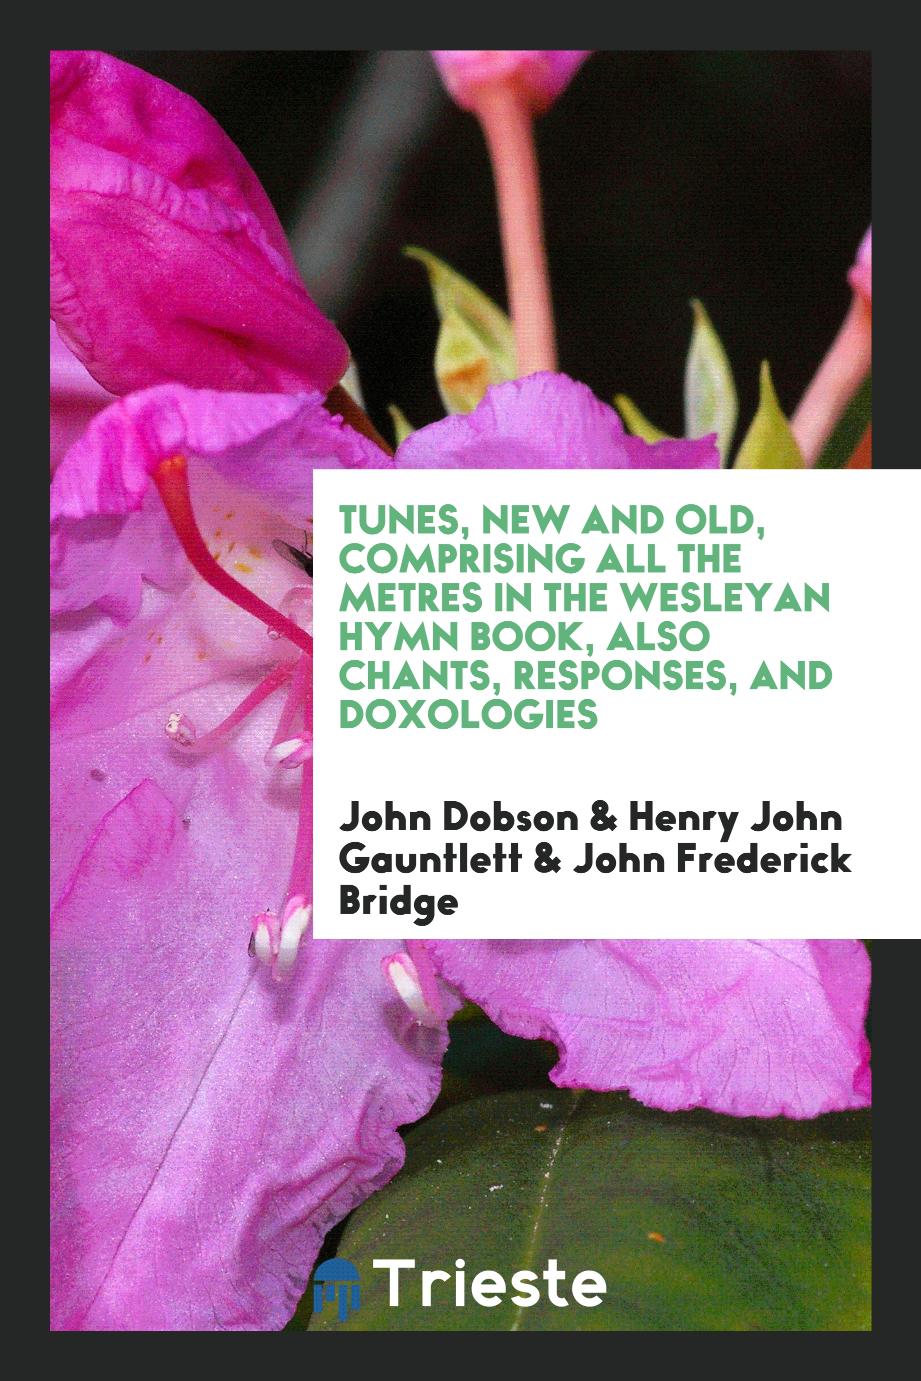 Tunes, New and Old, Comprising All the Metres in the Wesleyan Hymn Book, Also Chants, Responses, and Doxologies